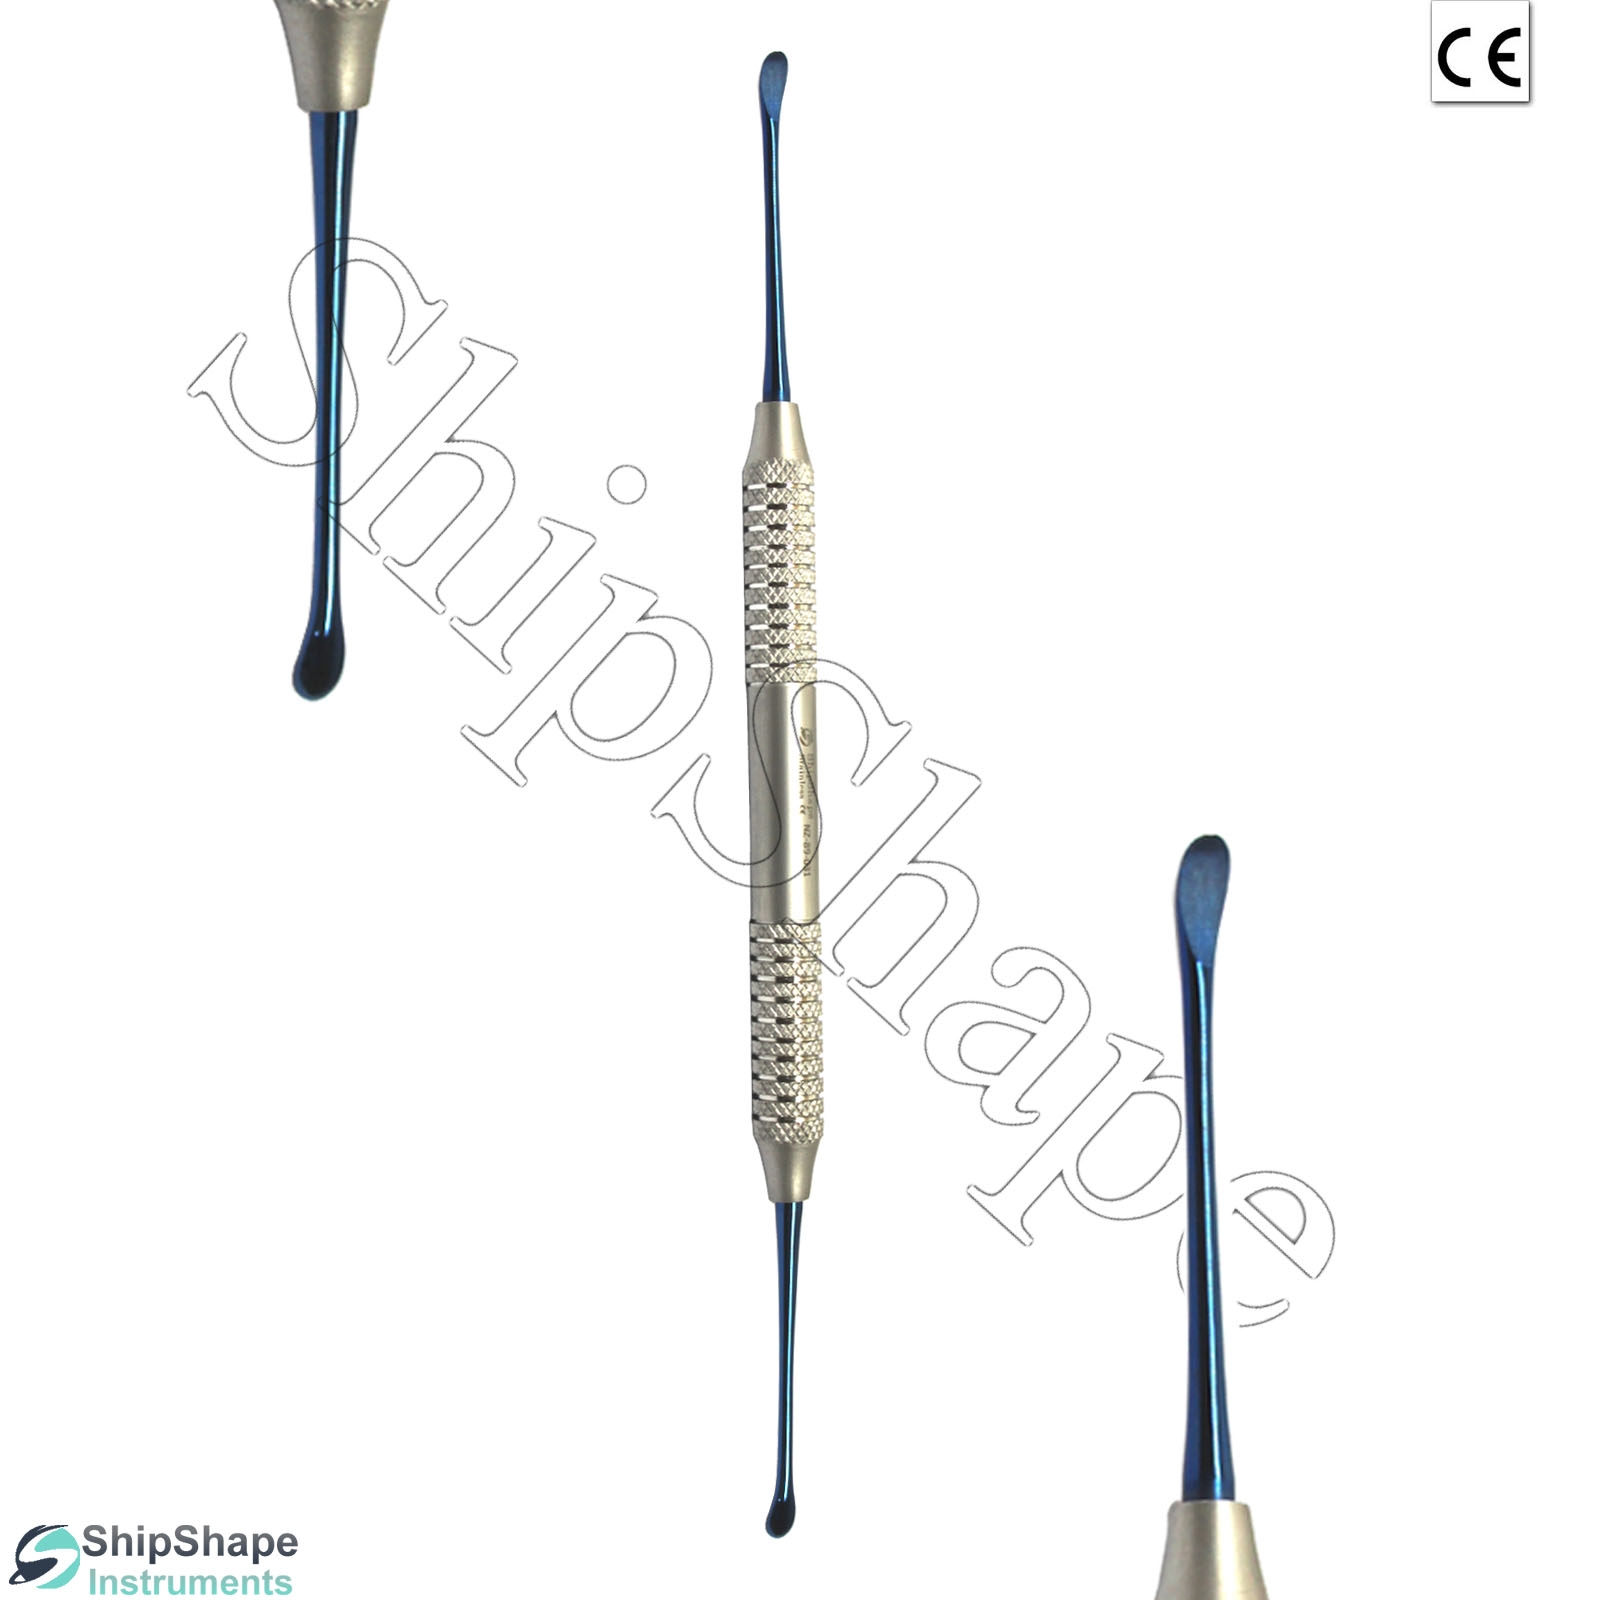 Lucas Bone Curette Universal Periodontal Curettes Dental Surgical Tooth Cleaning Instruments-704